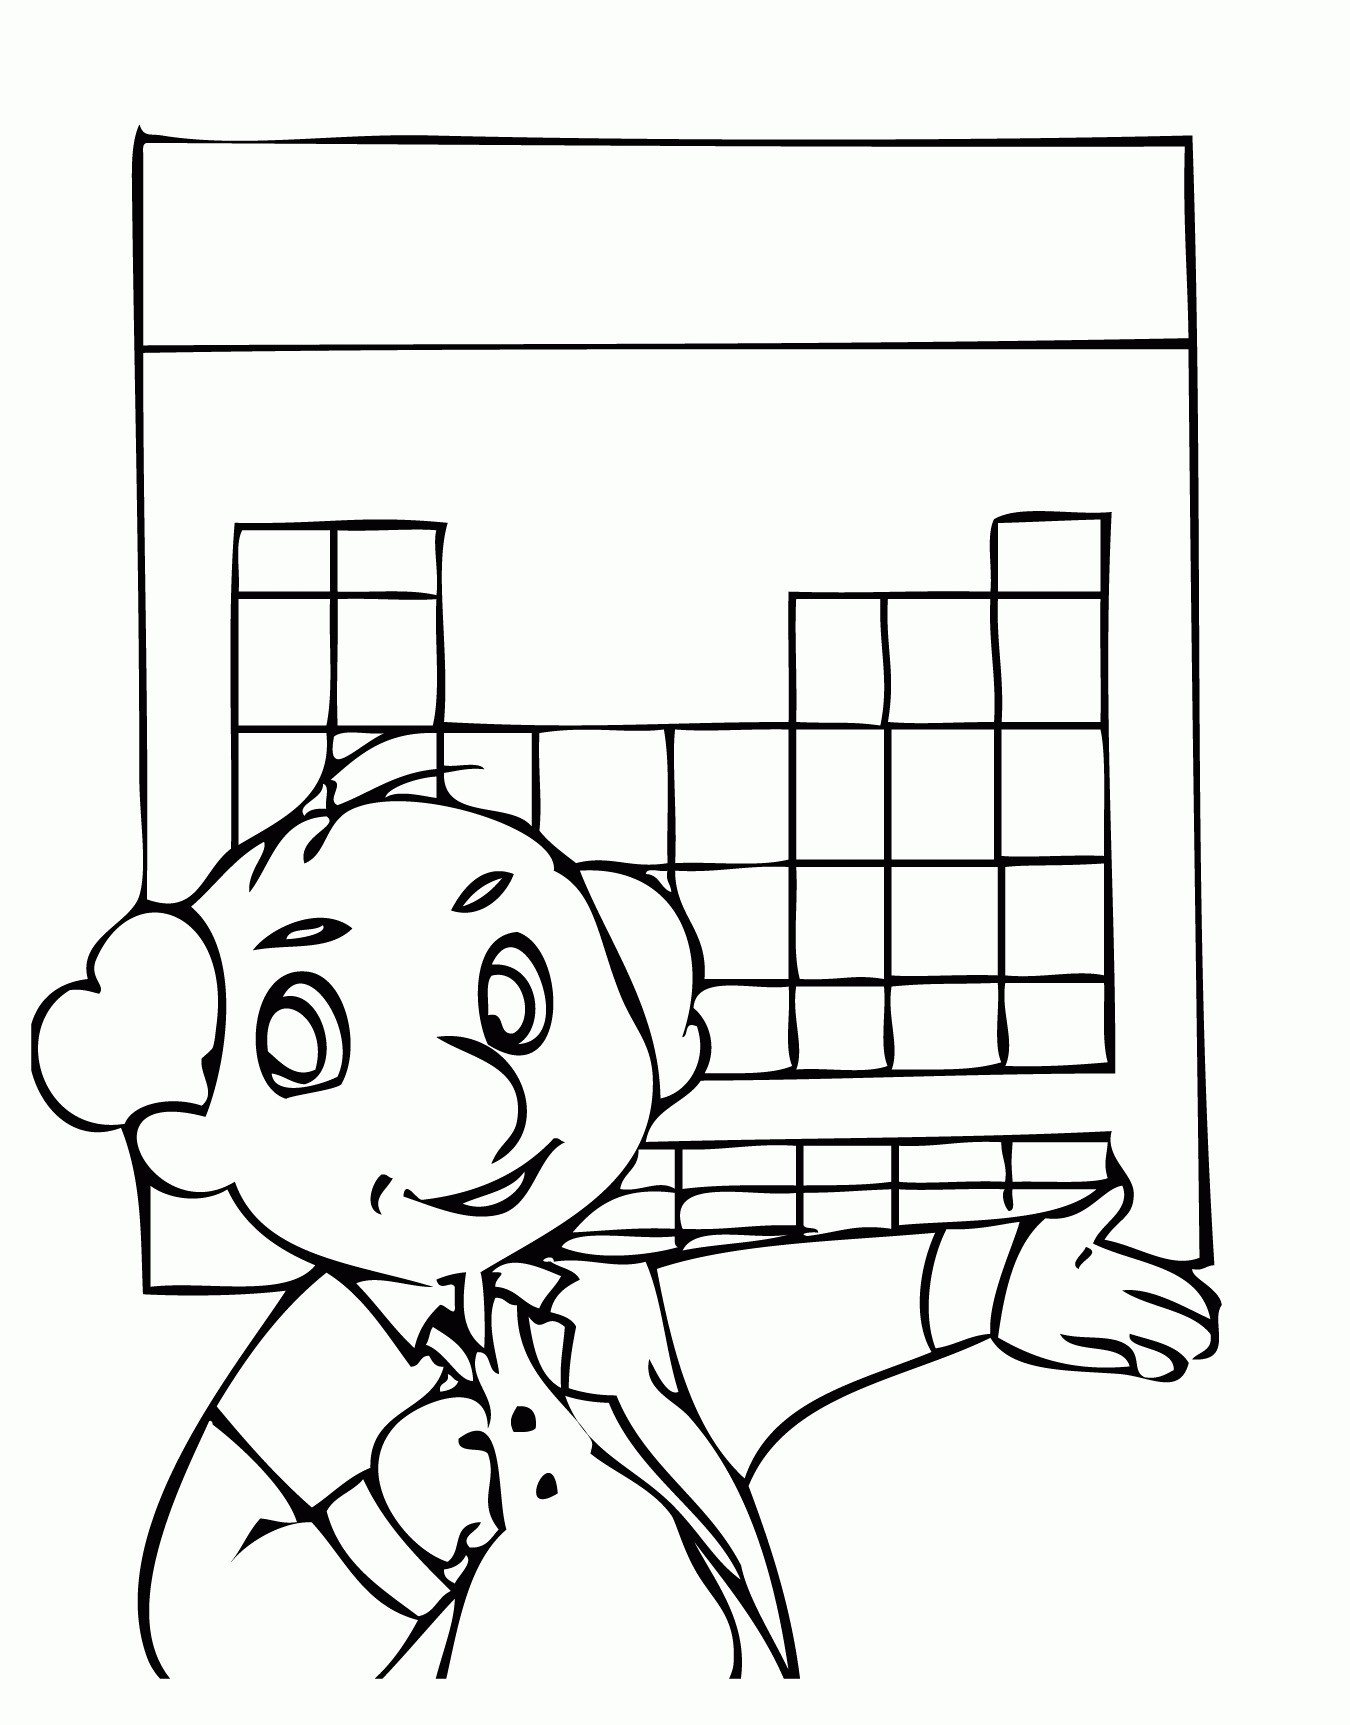 Periodic Table - Periodic Table Coloring Page